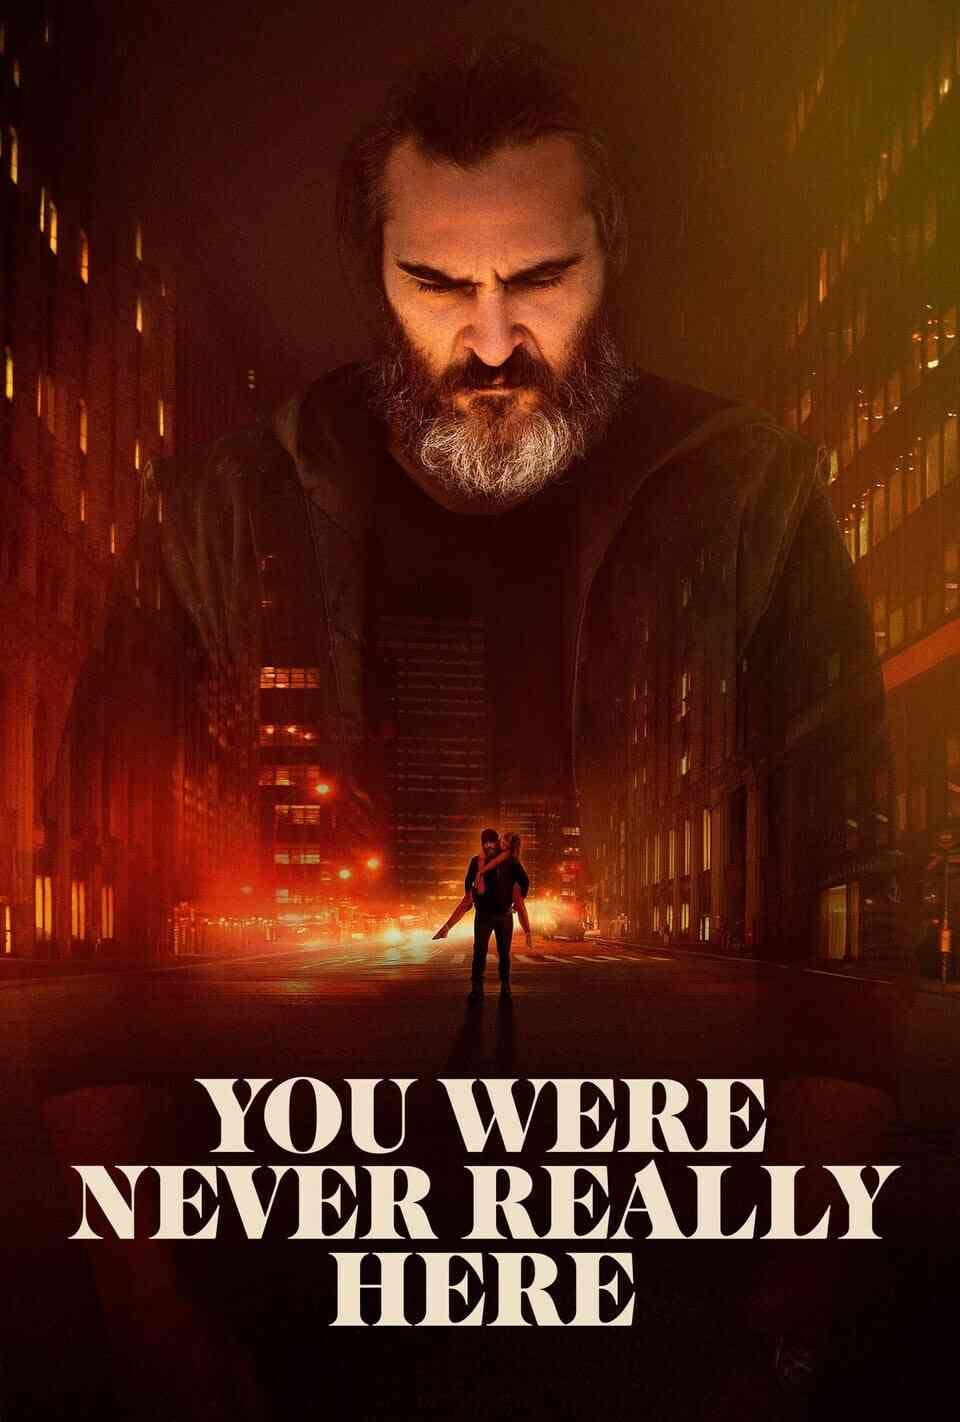 Read You Were Never Really Here screenplay (poster)